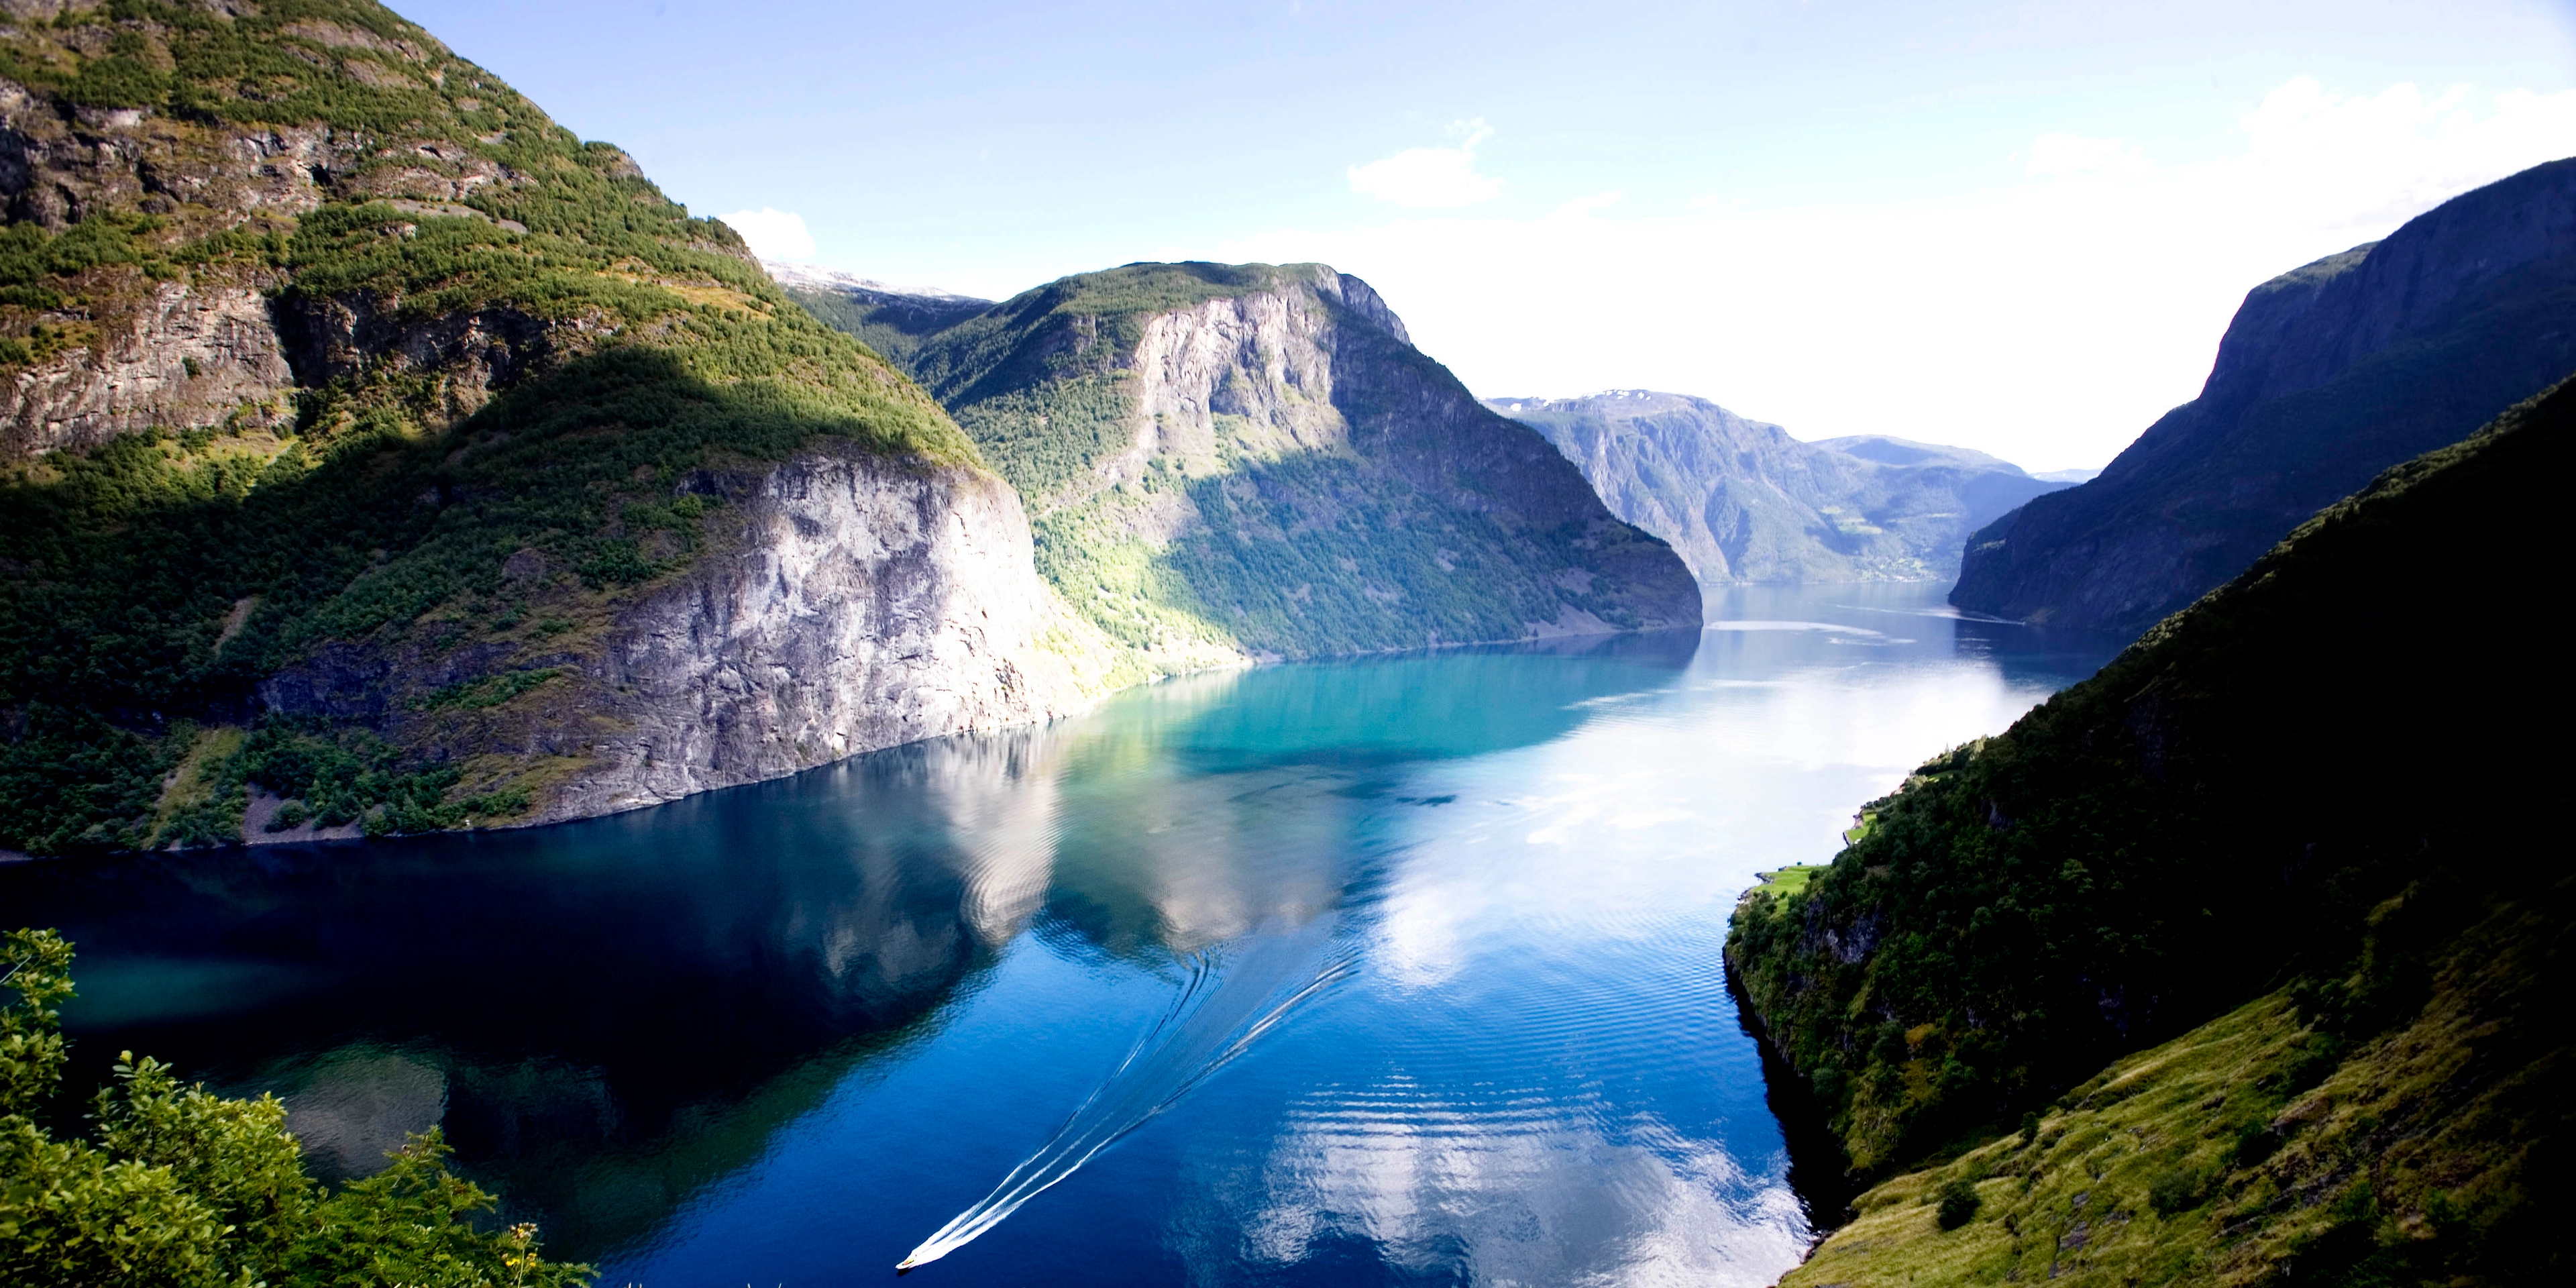 Norway in a nutshell® - come visit Norway's most magical fjords and scenic spots in Norway with Fjord Tours